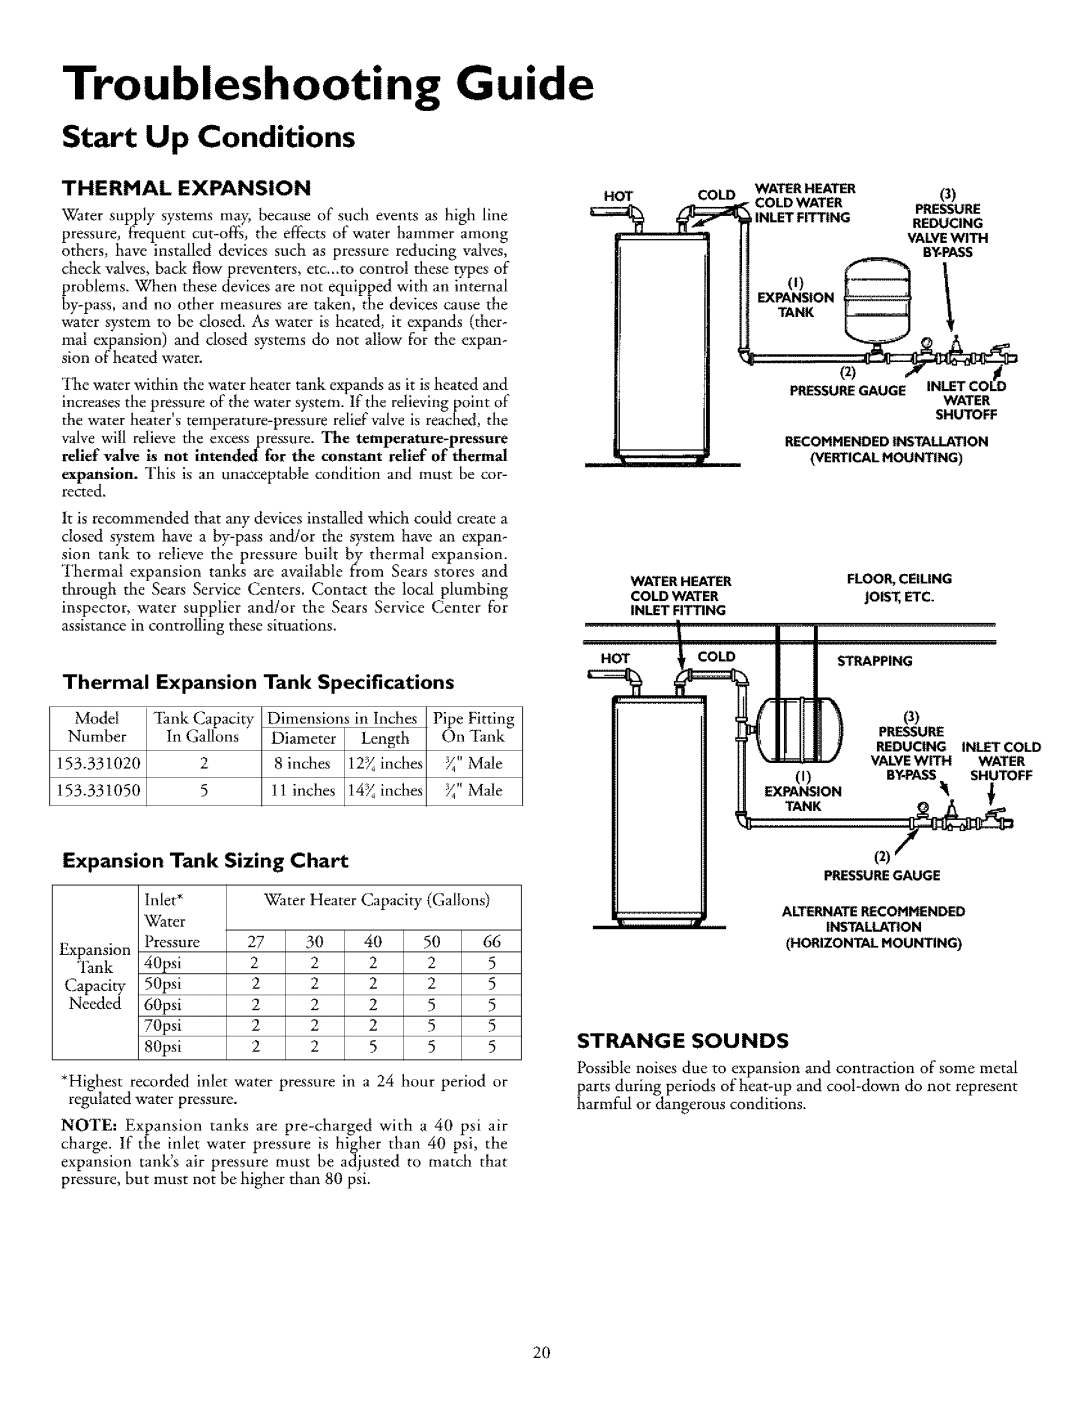 Kenmore 153.318131 Troubleshooting Guide, Start Up Conditions, Thermal Expansion Tank Specifications, Sizing Chart 